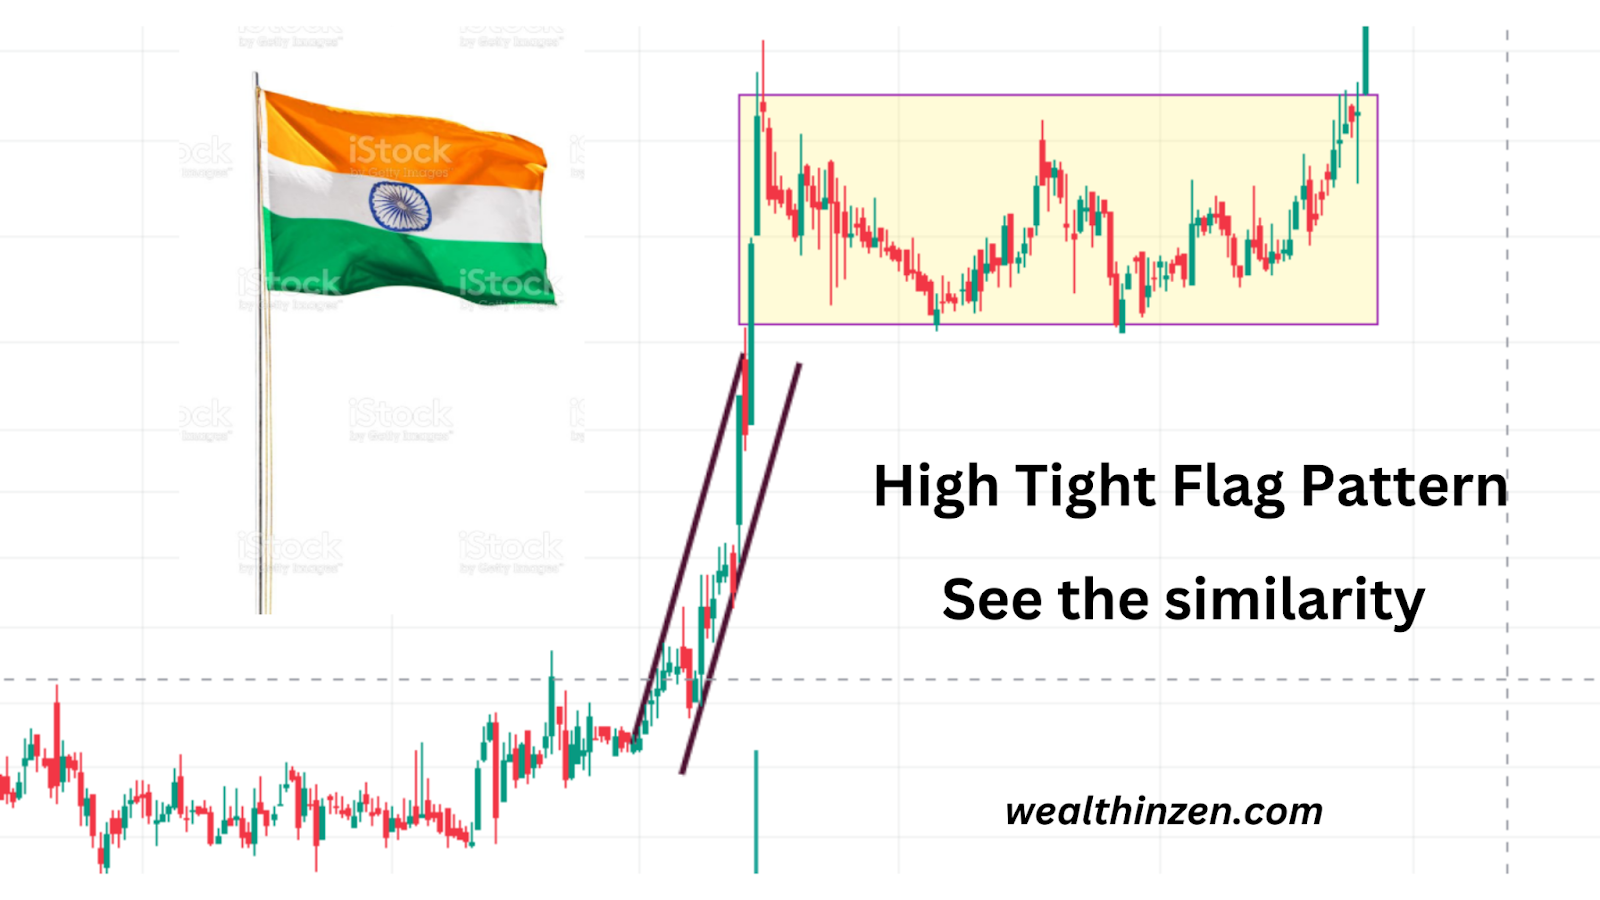 This image tells the similarity of high tight flag with the high tight flag pattern in price action of charts